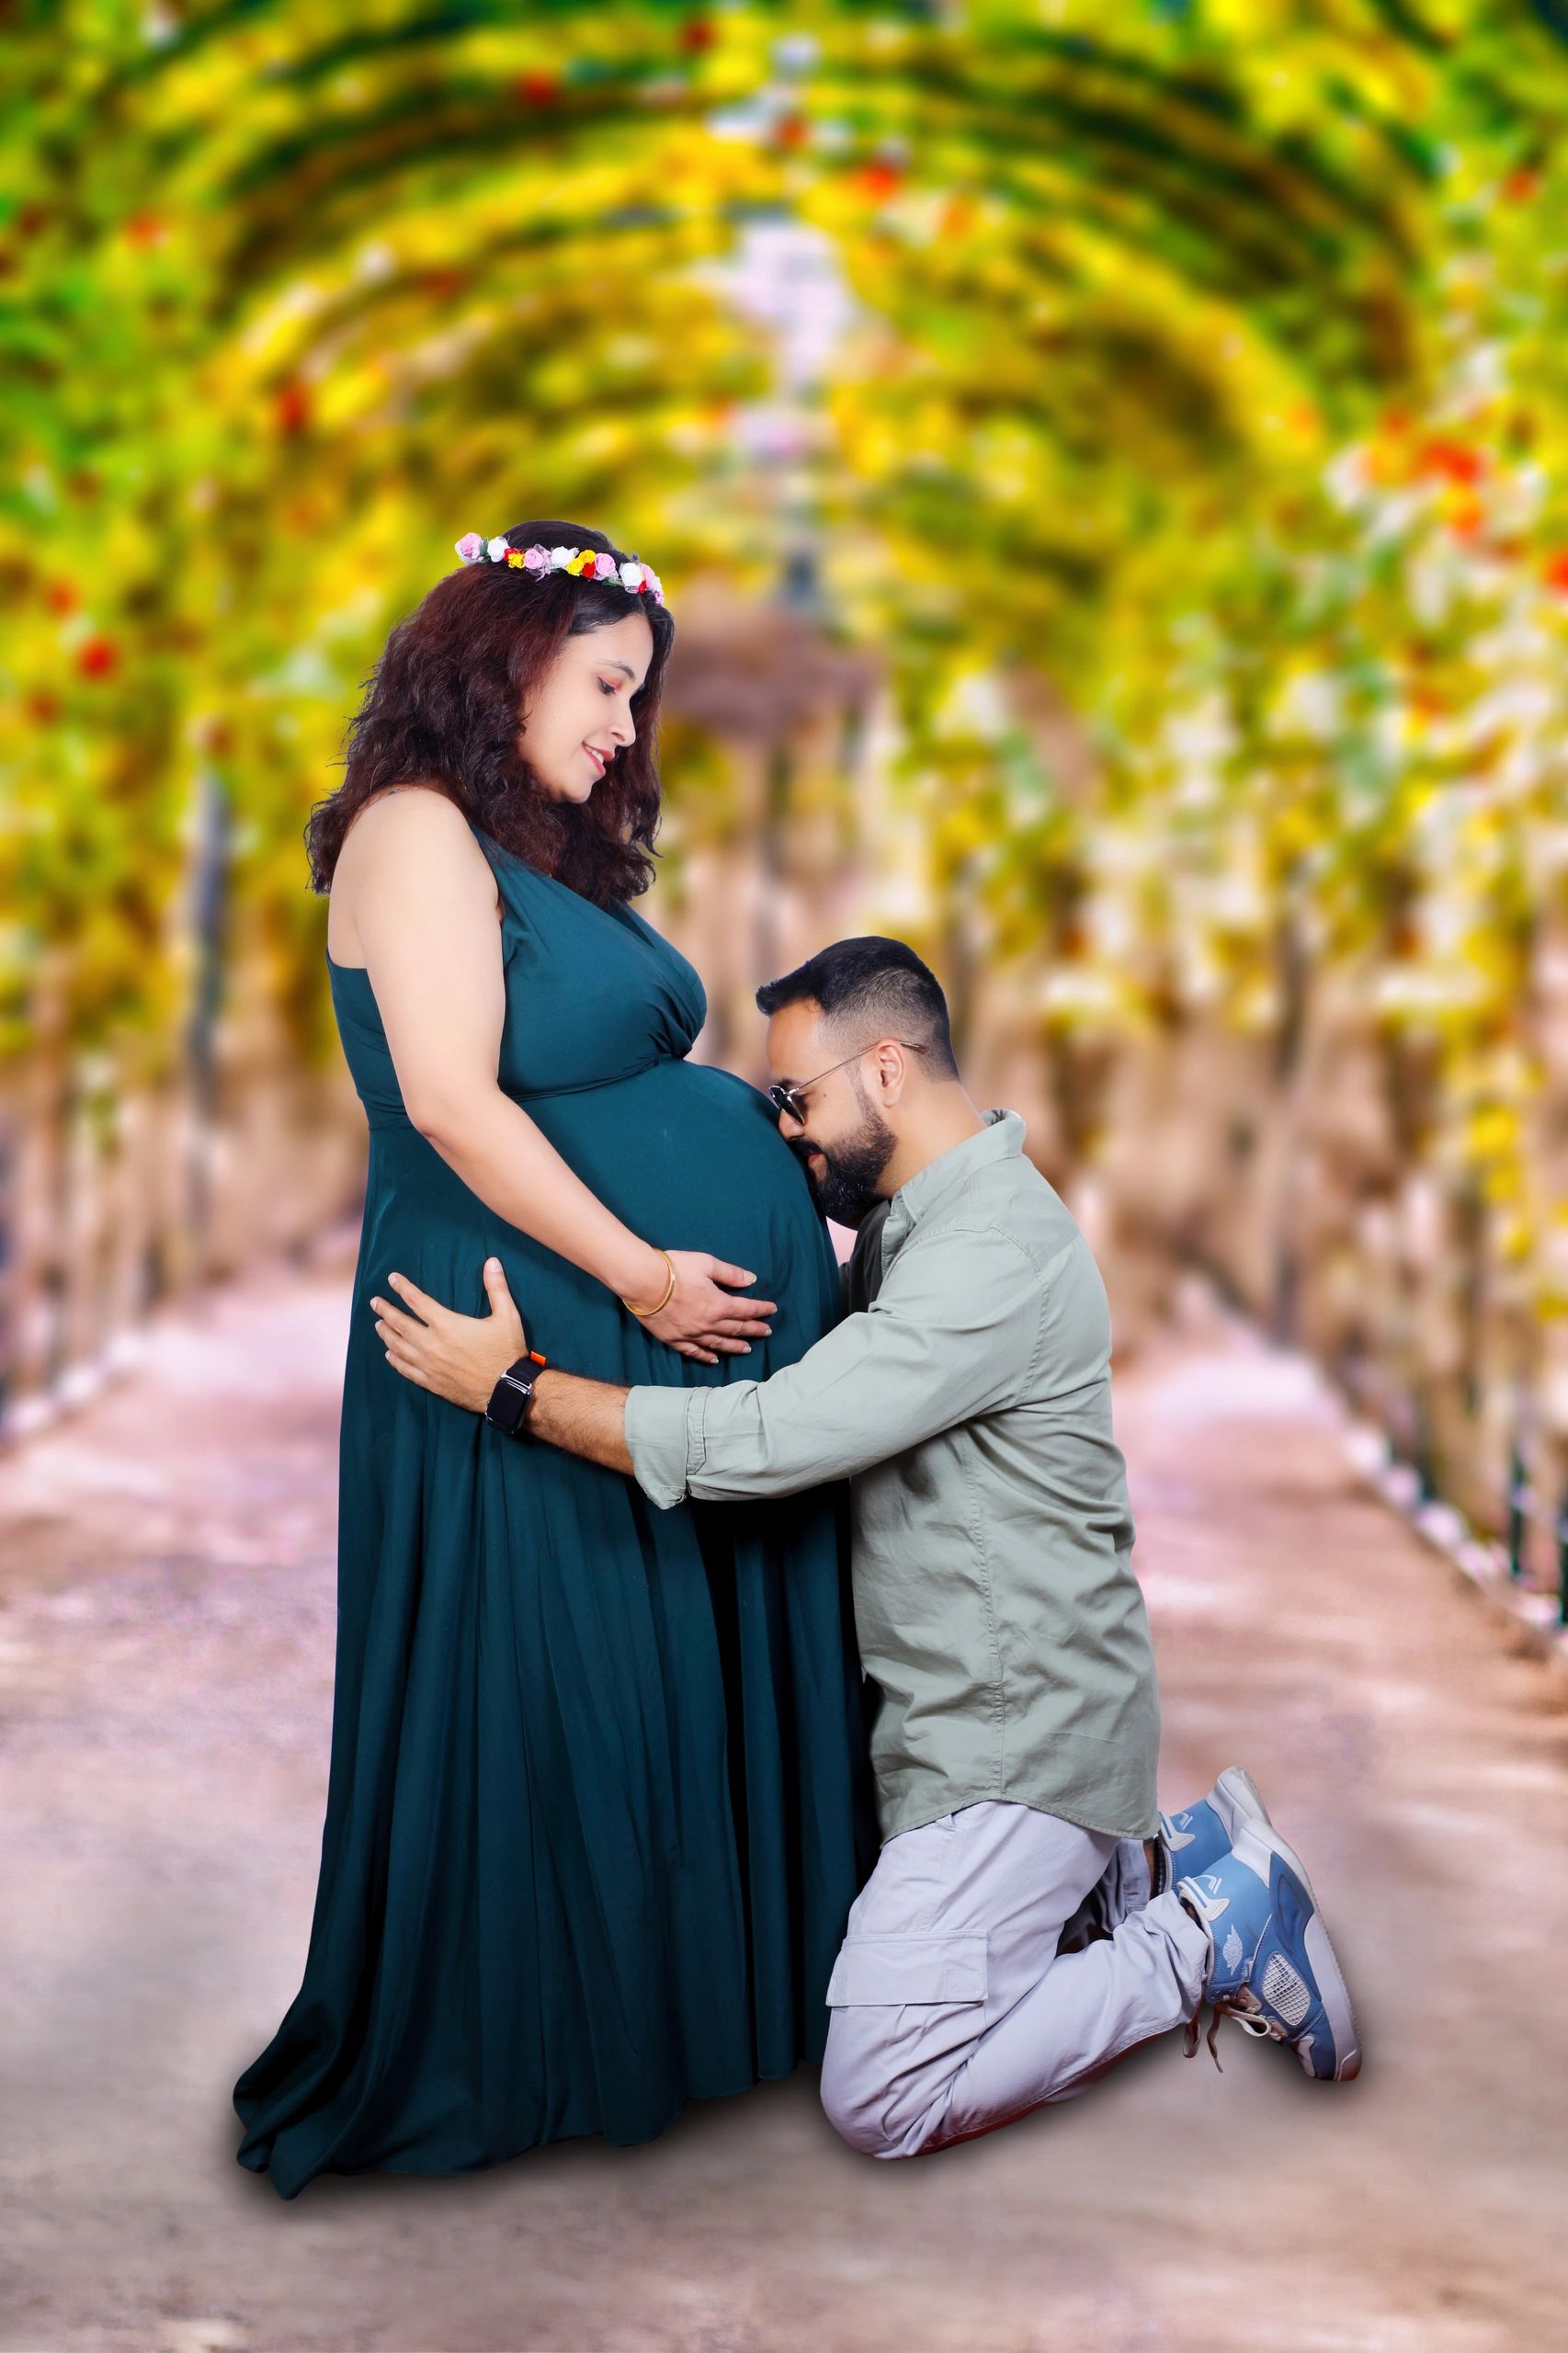 Anjali Wedding Photographers - Pre Delivery Photography, Pregnancy